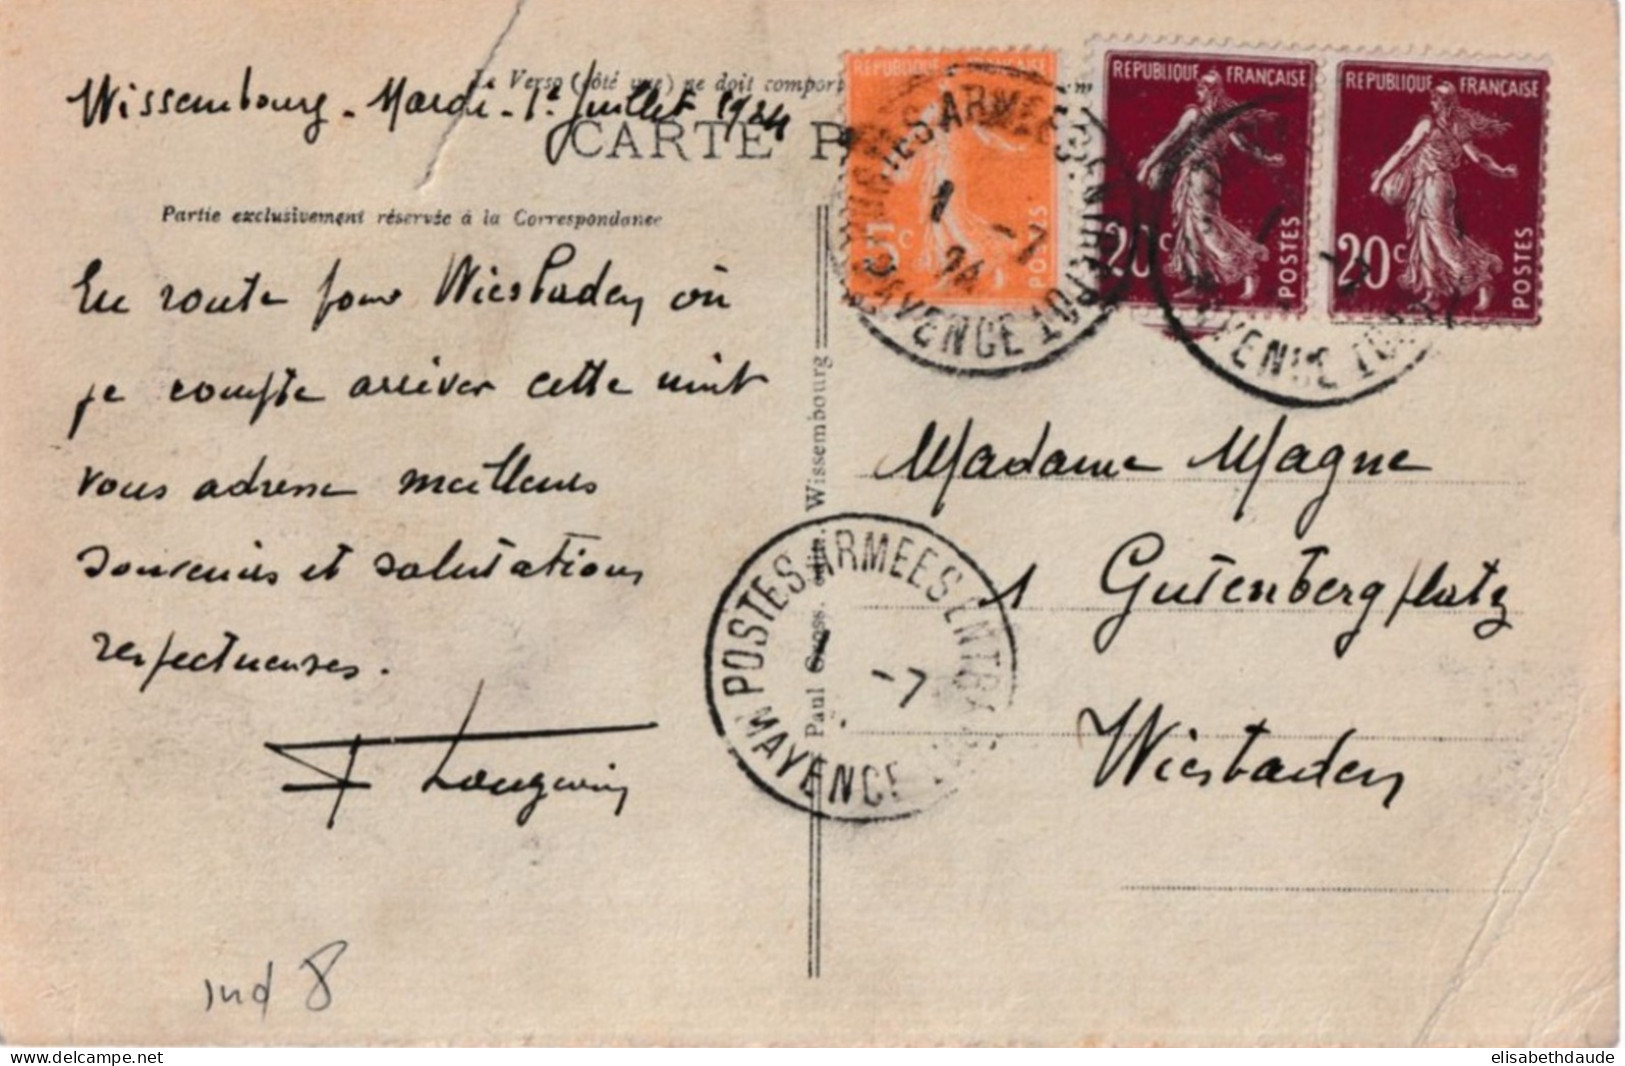 1924 - OCC. FRANCAISE EN ALLEMAGNE ! - CPFM De WISSEMBOURG (ALSACE) OBLITERE MAYENCE ENTREPOT - SP180 (WIESBADEN) AU DOS - Military Postmarks From 1900 (out Of Wars Periods)